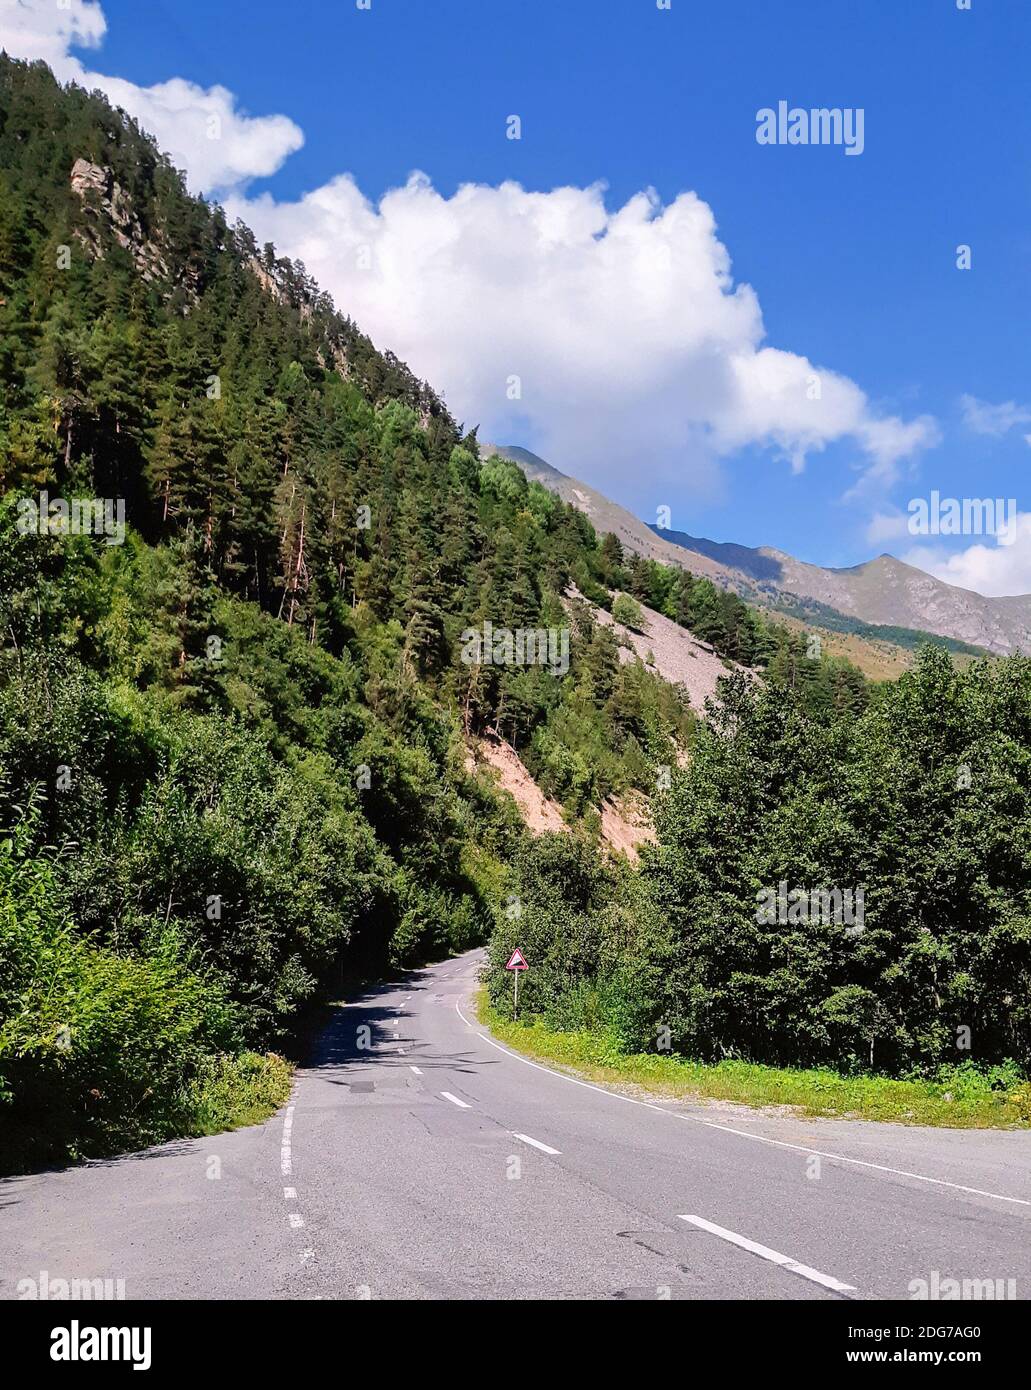 Summer view on a winding road amidst forest beside high mountain slope covered with green pine trees Stock Photo